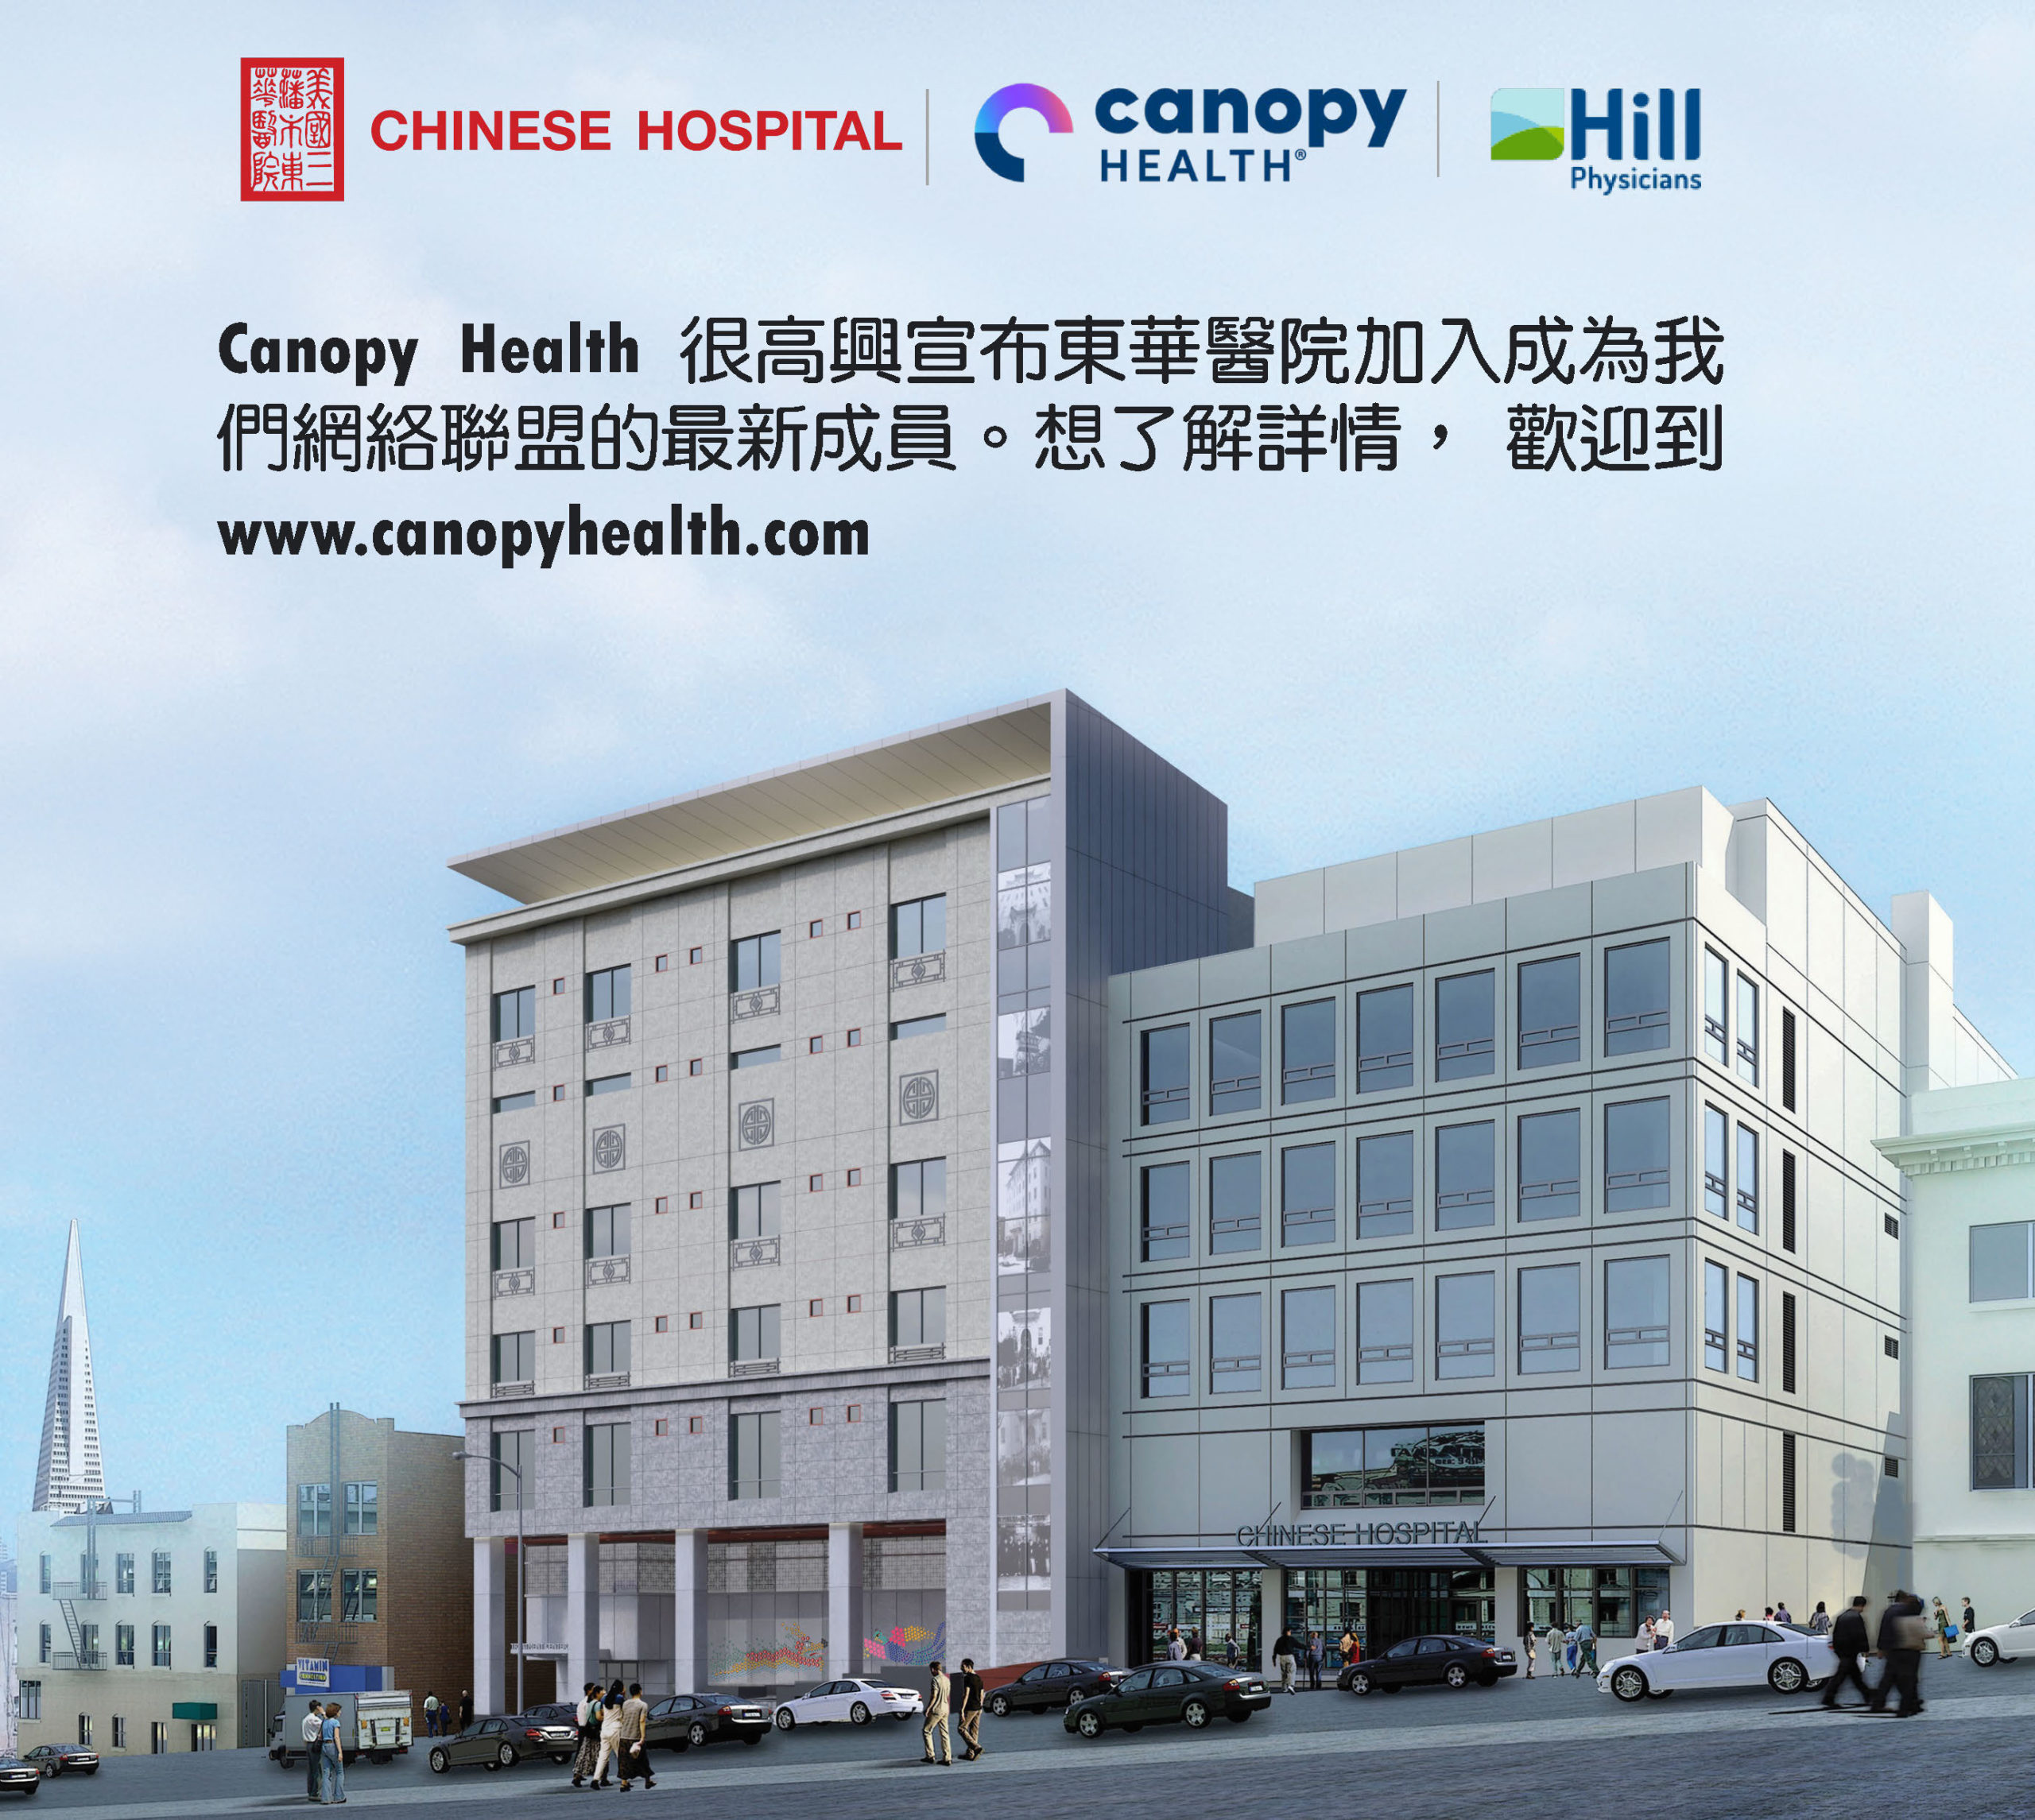 Canopy Health Announces the Addition of Chinese Hospital to its Network Alliance